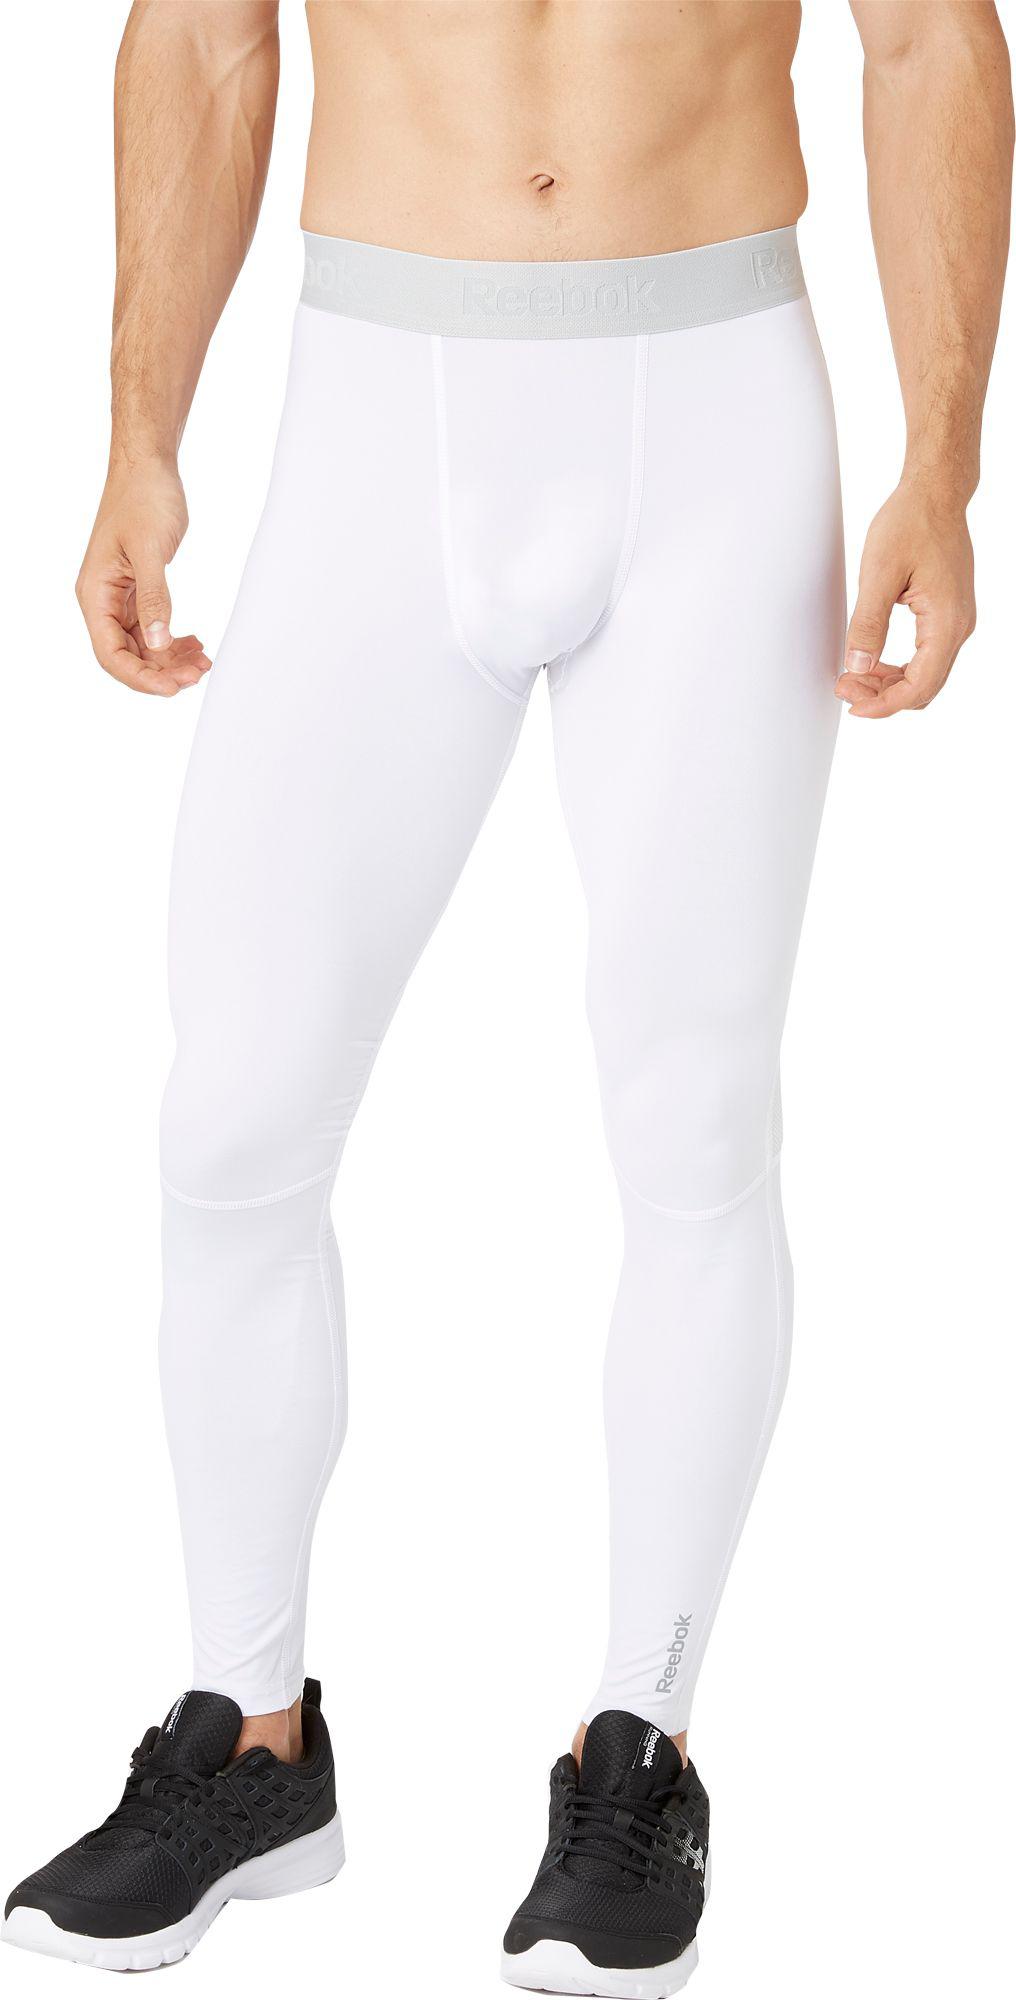 Reebok Synthetic Compression Tights in White for Men - Lyst